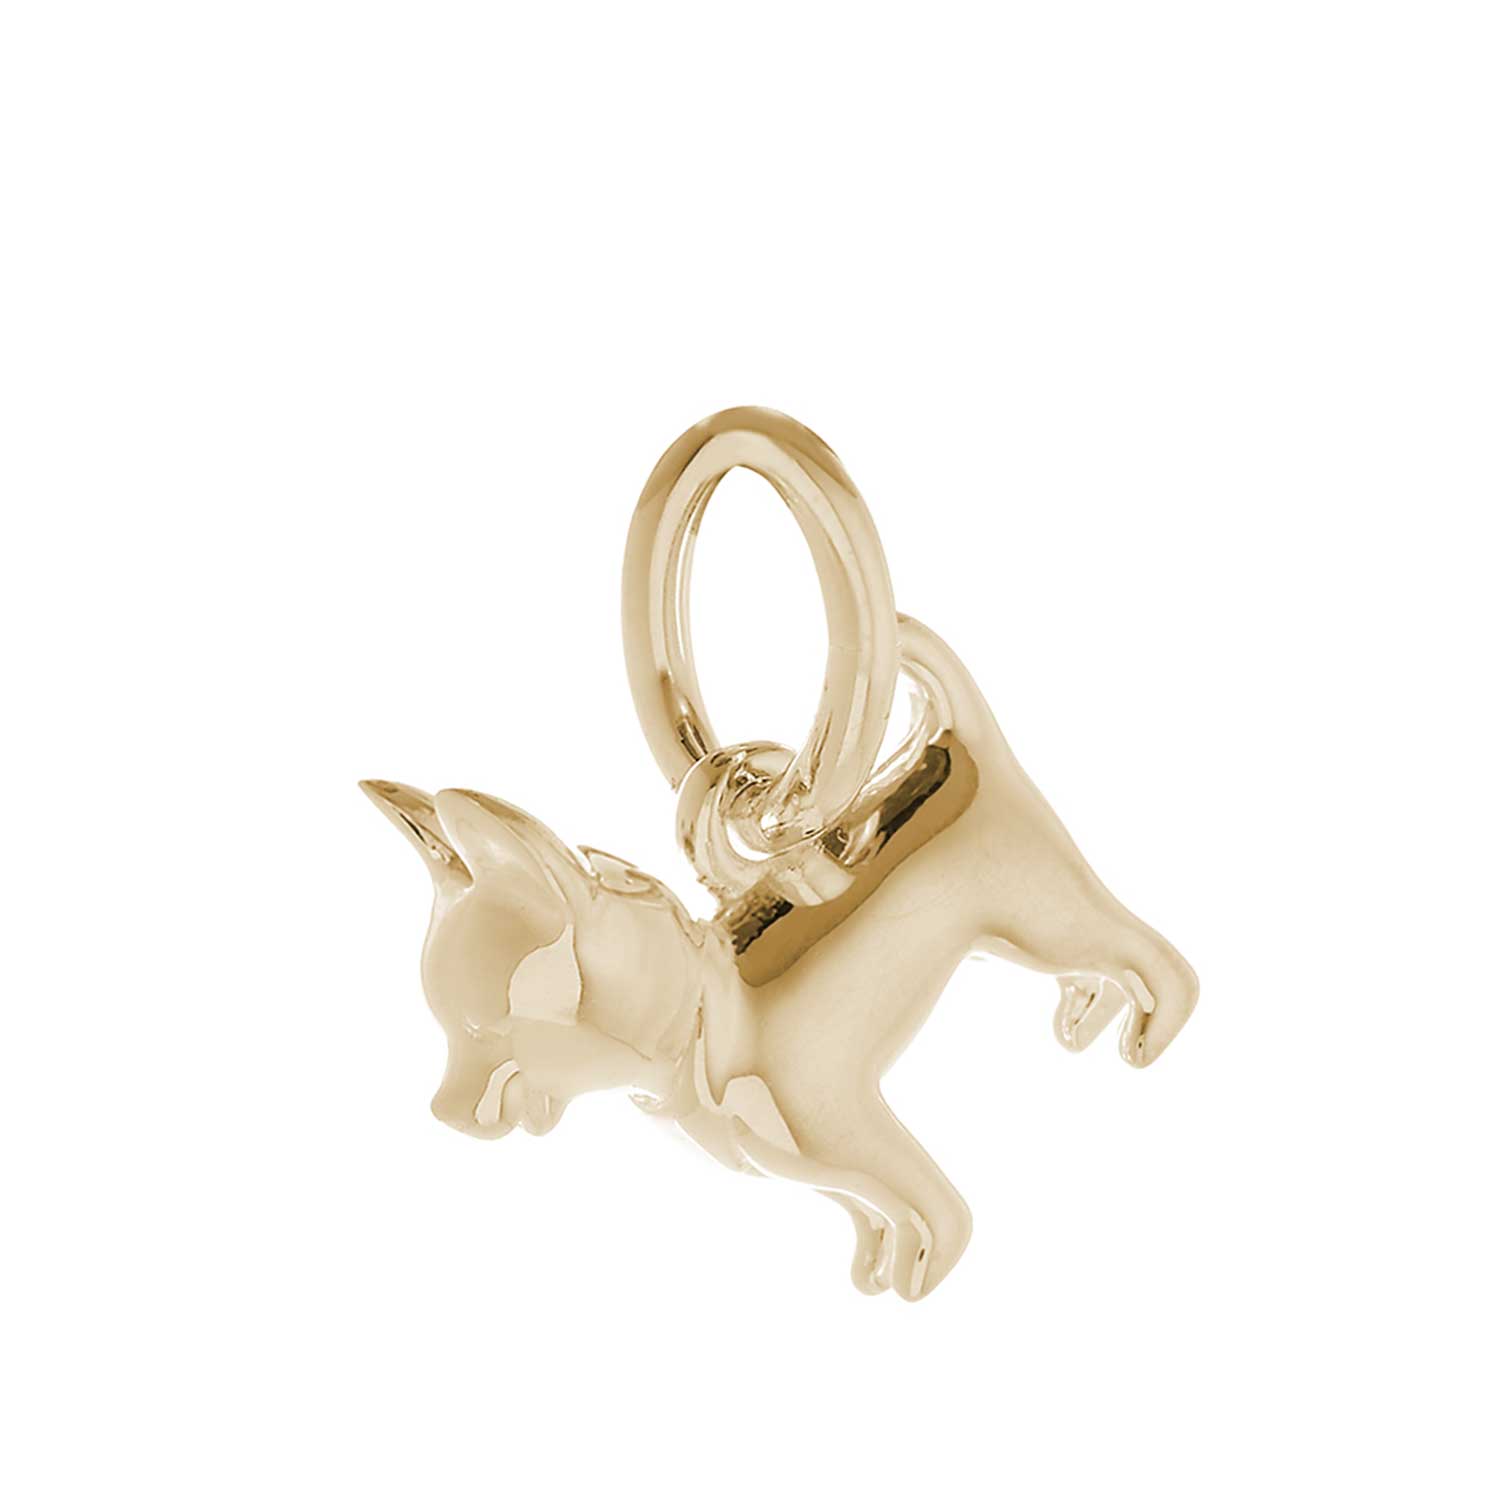 Solid 9ct gold Chihuahua charm with tiny bandana, perfect for charm bracelets or necklaces.